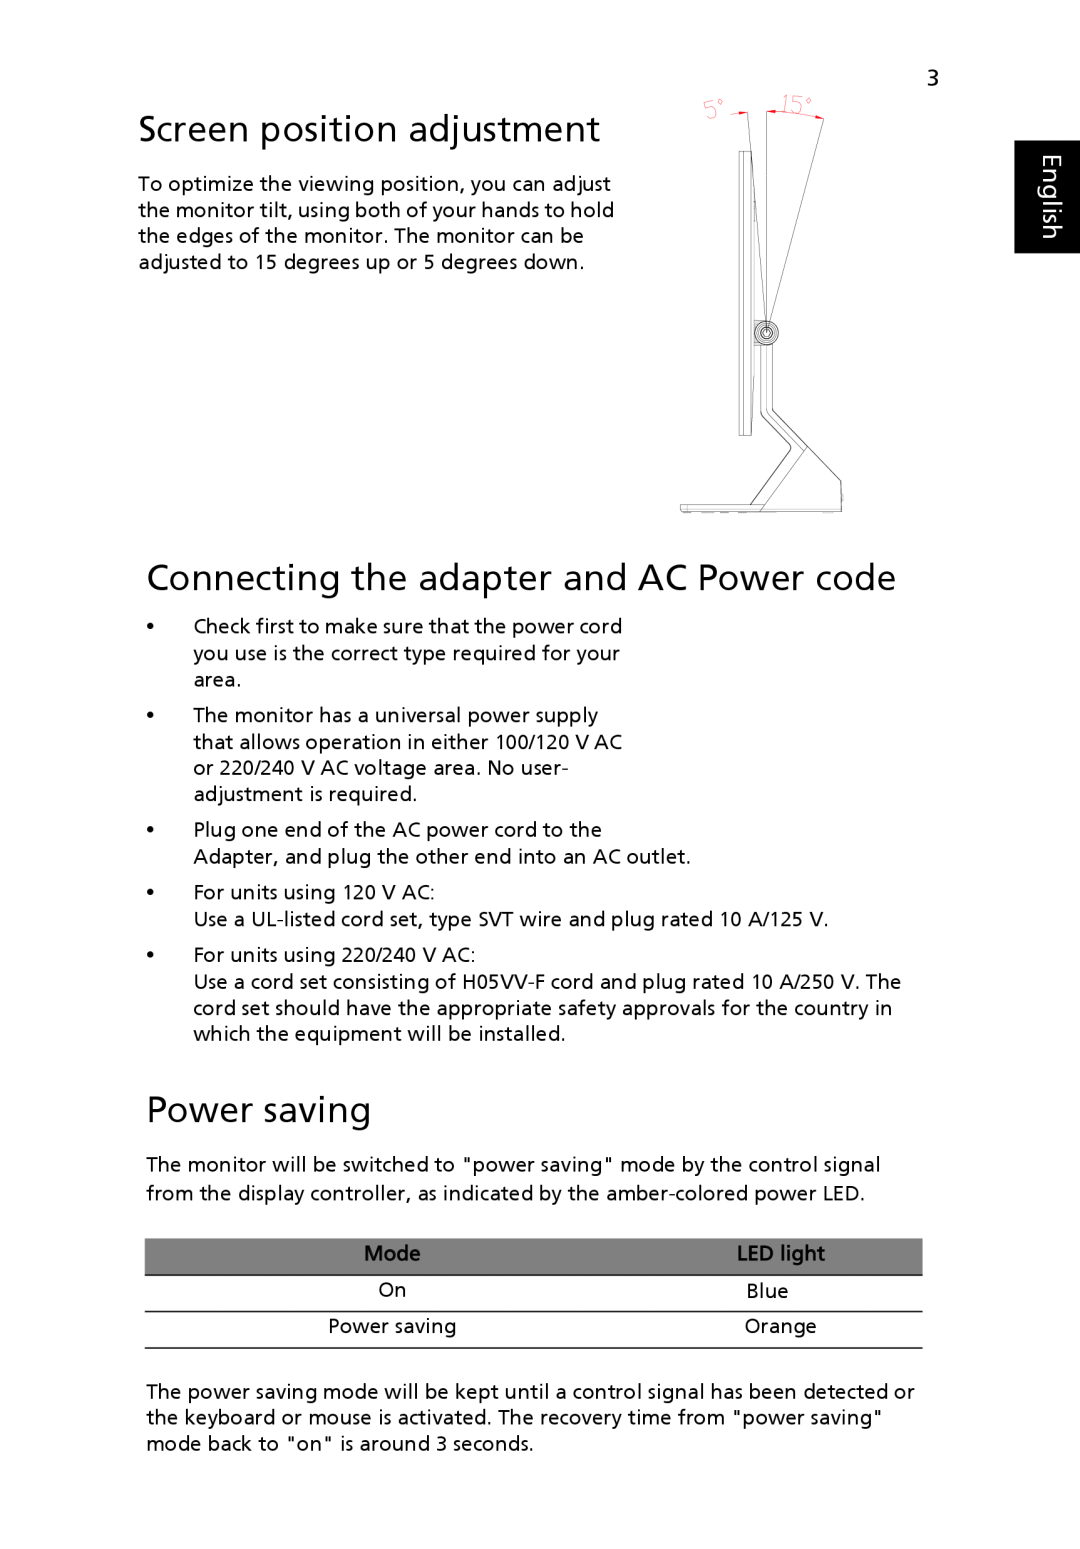 Acer S243HL manual Screen position adjustment, Connecting the adapter and AC Power code, Power saving, English 